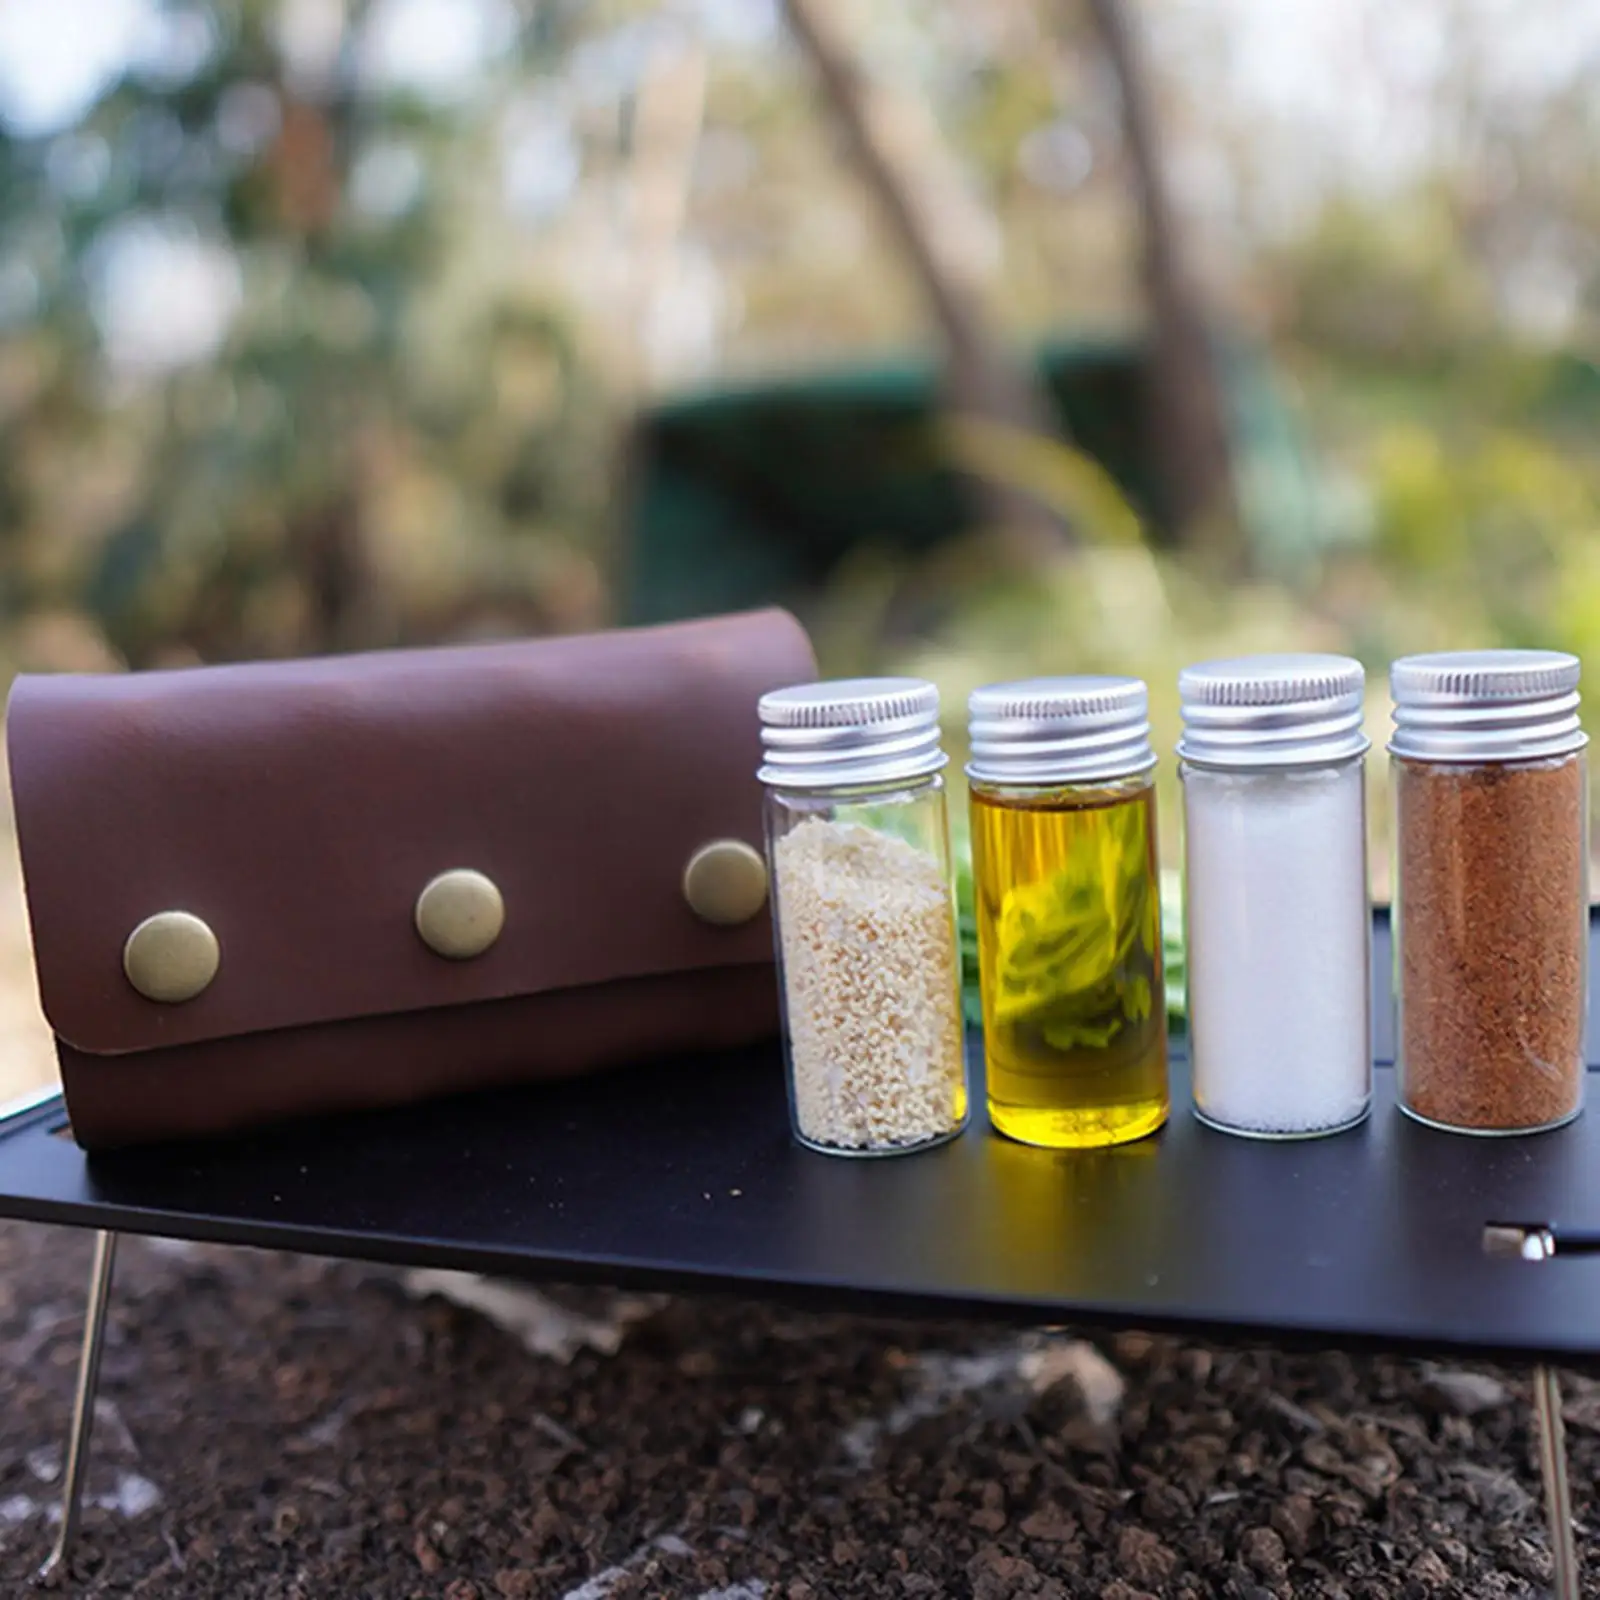 1 Set Portable Mini Condiment Bottle Kit Outdoor Camping Barbecue Spice Jar Seasoning Storage Box For Travel Picnic BBQ